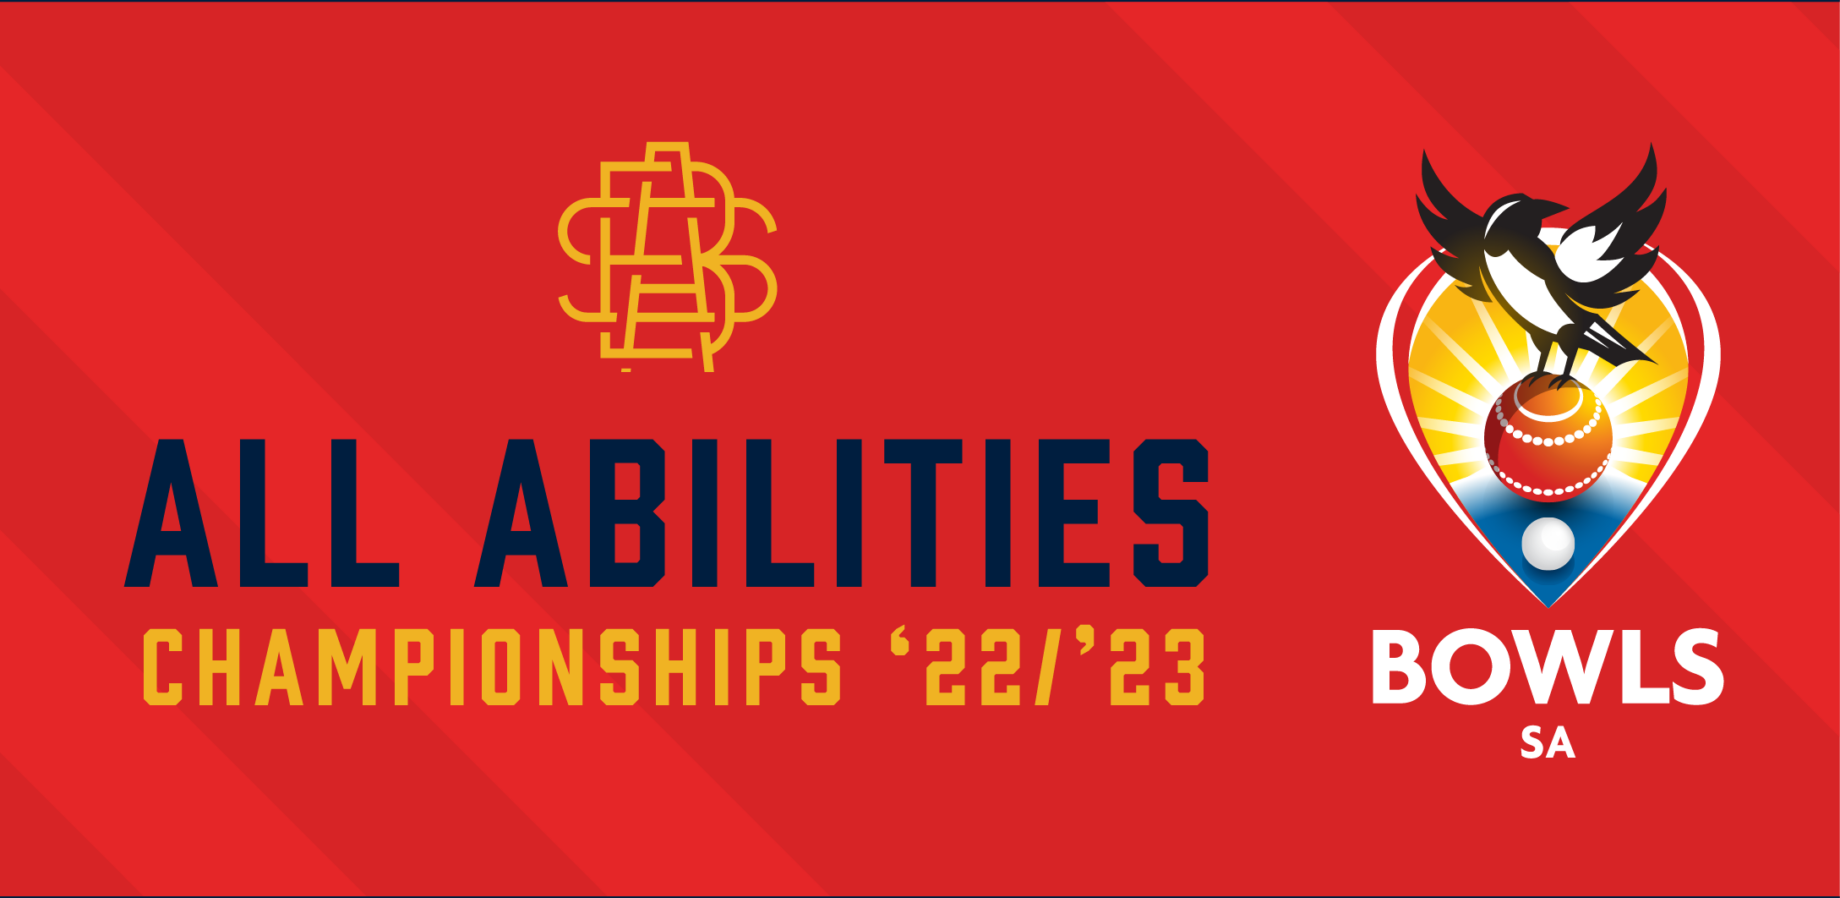 BSA_State_Champs_Banners_All Abilities